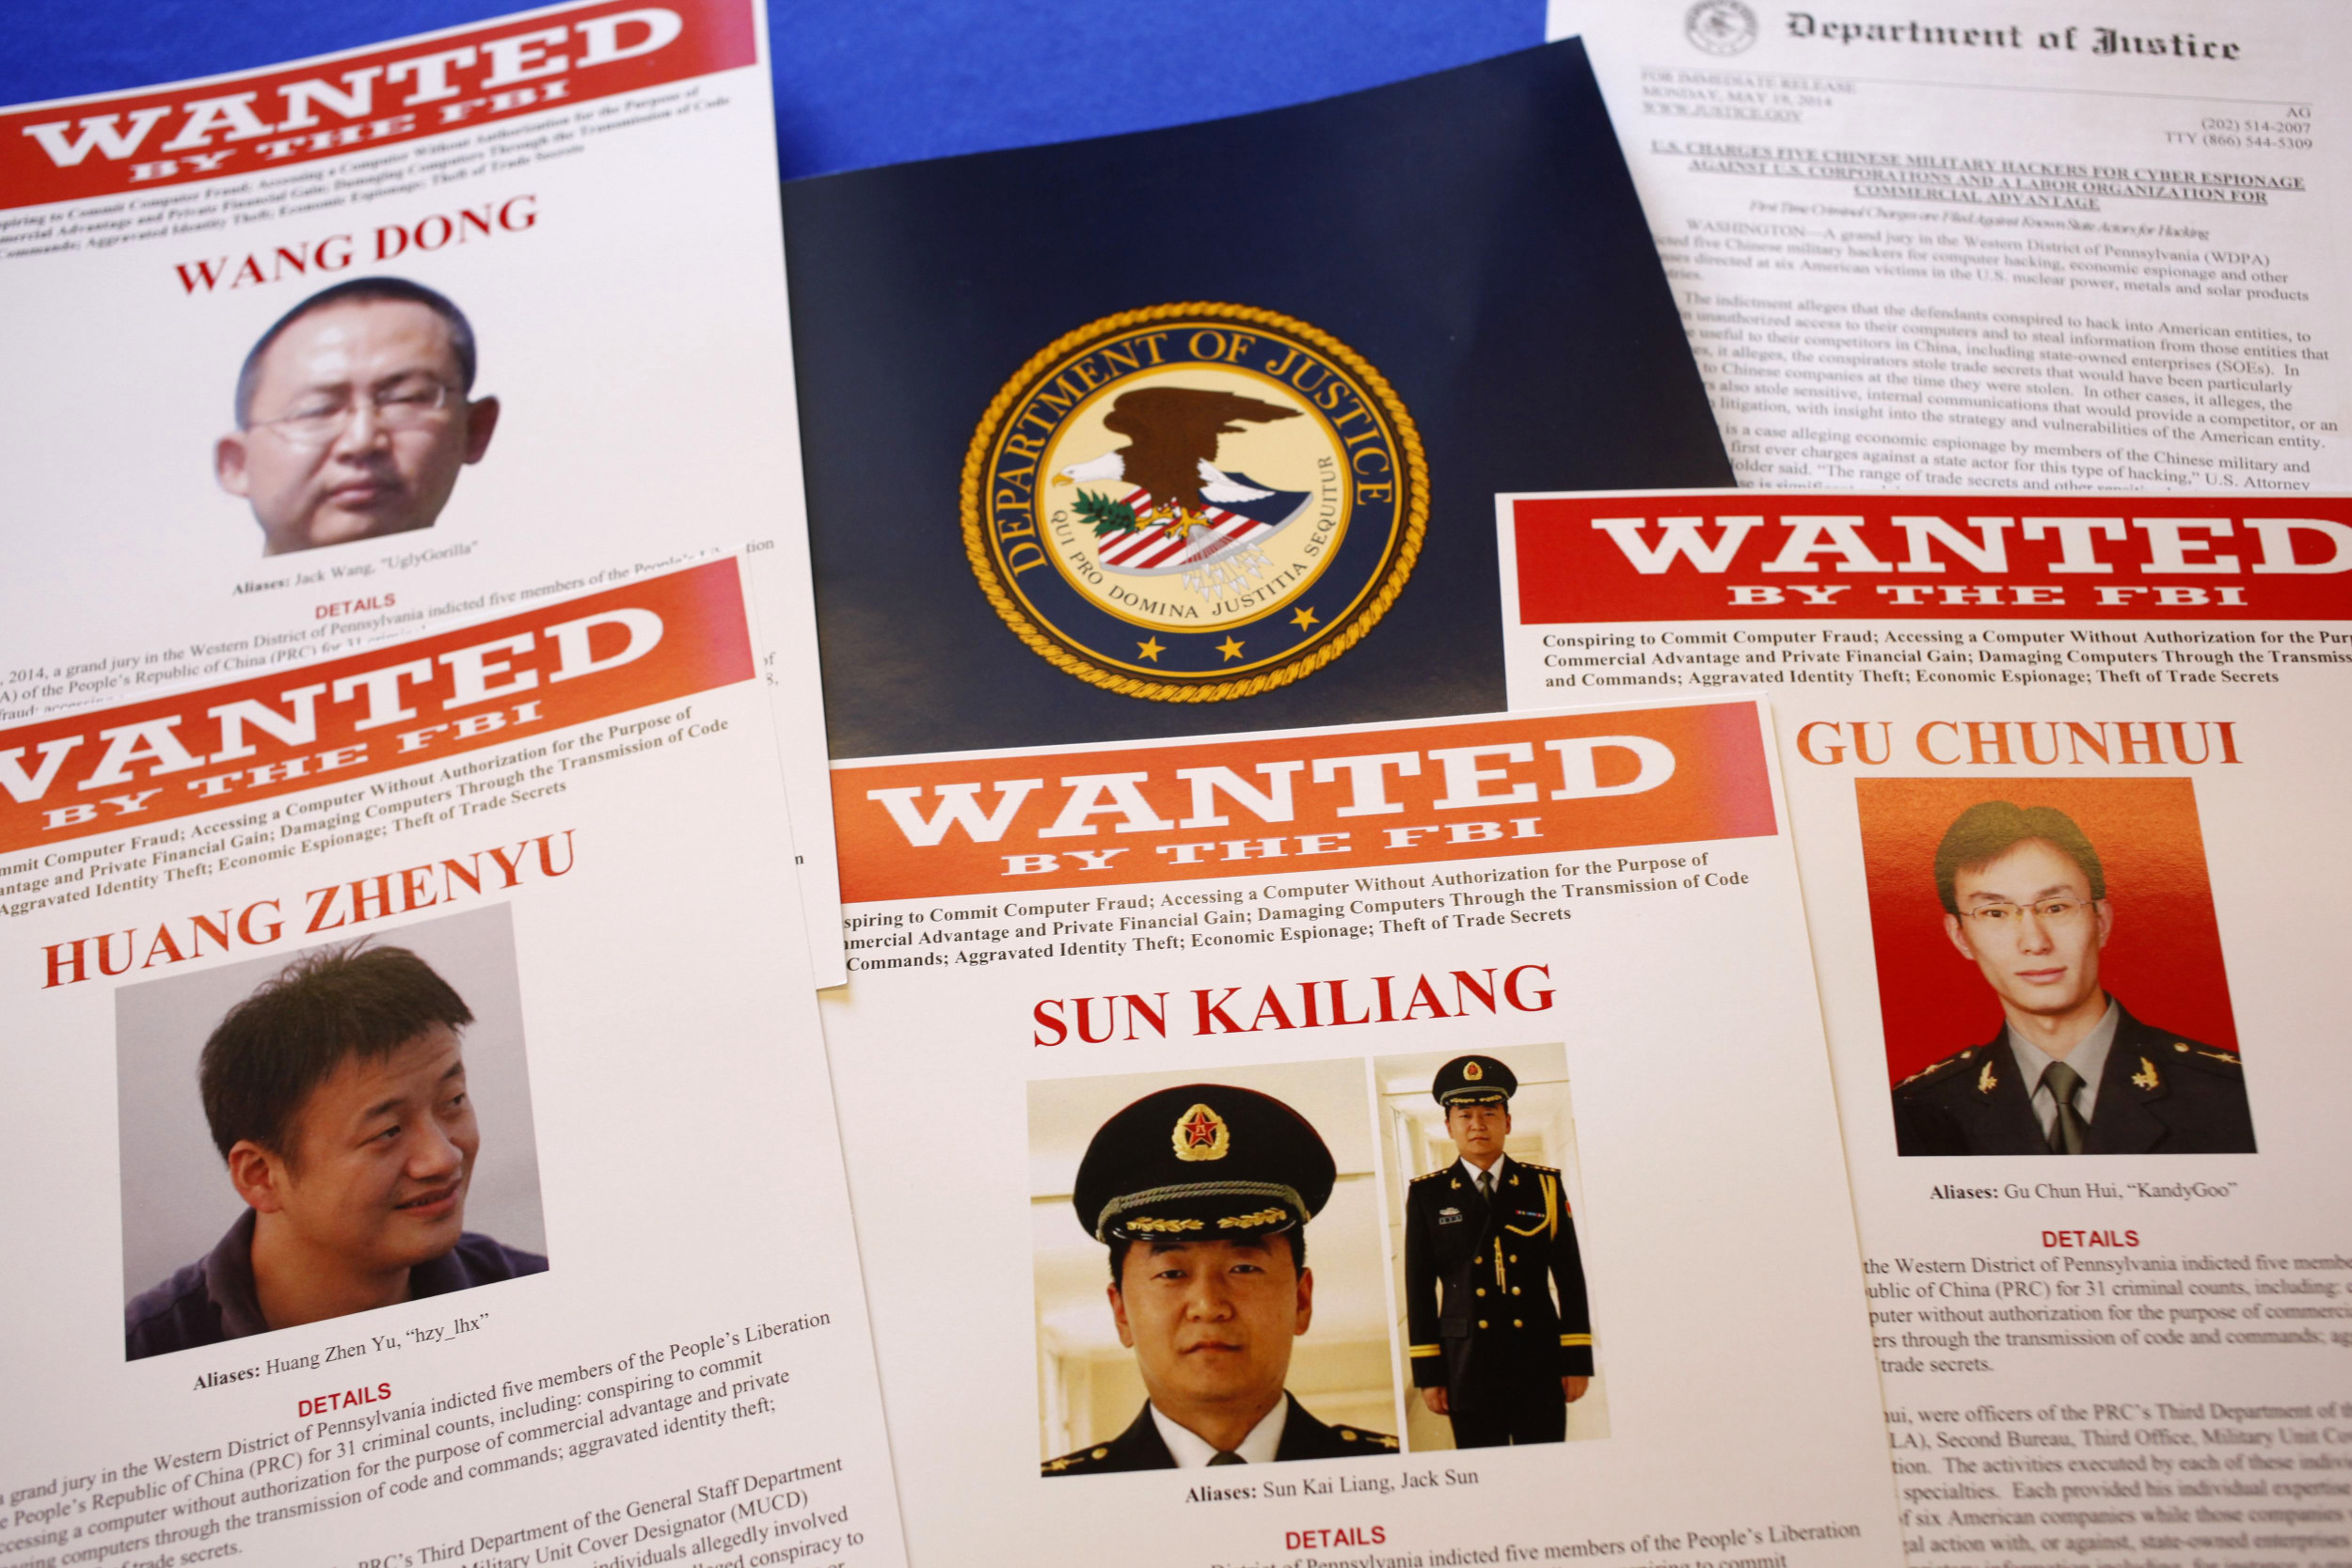 "Wanted" posters of Wang Dong and the other accused. Photo: AP